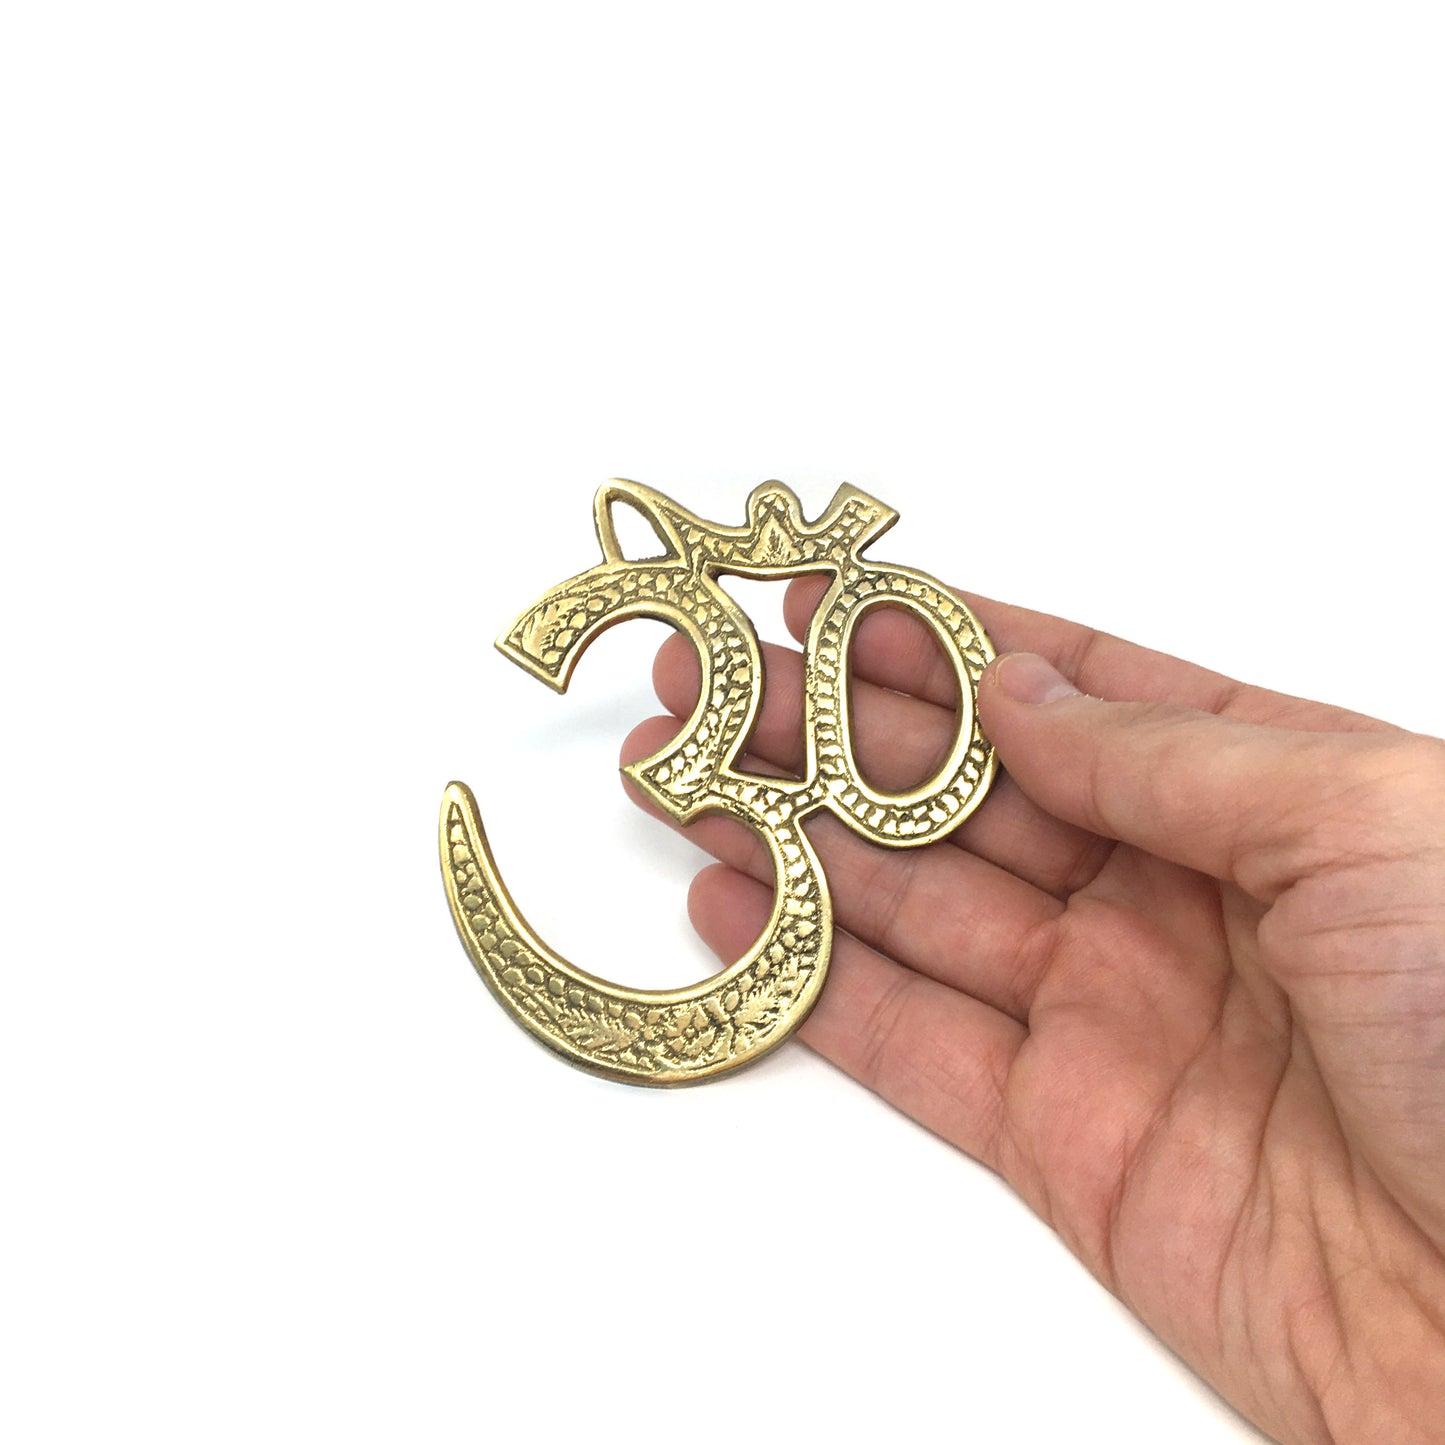 2 Om Symbols Handcrafted India Brass Decorative Wall Hanging- Detailed 3.5"